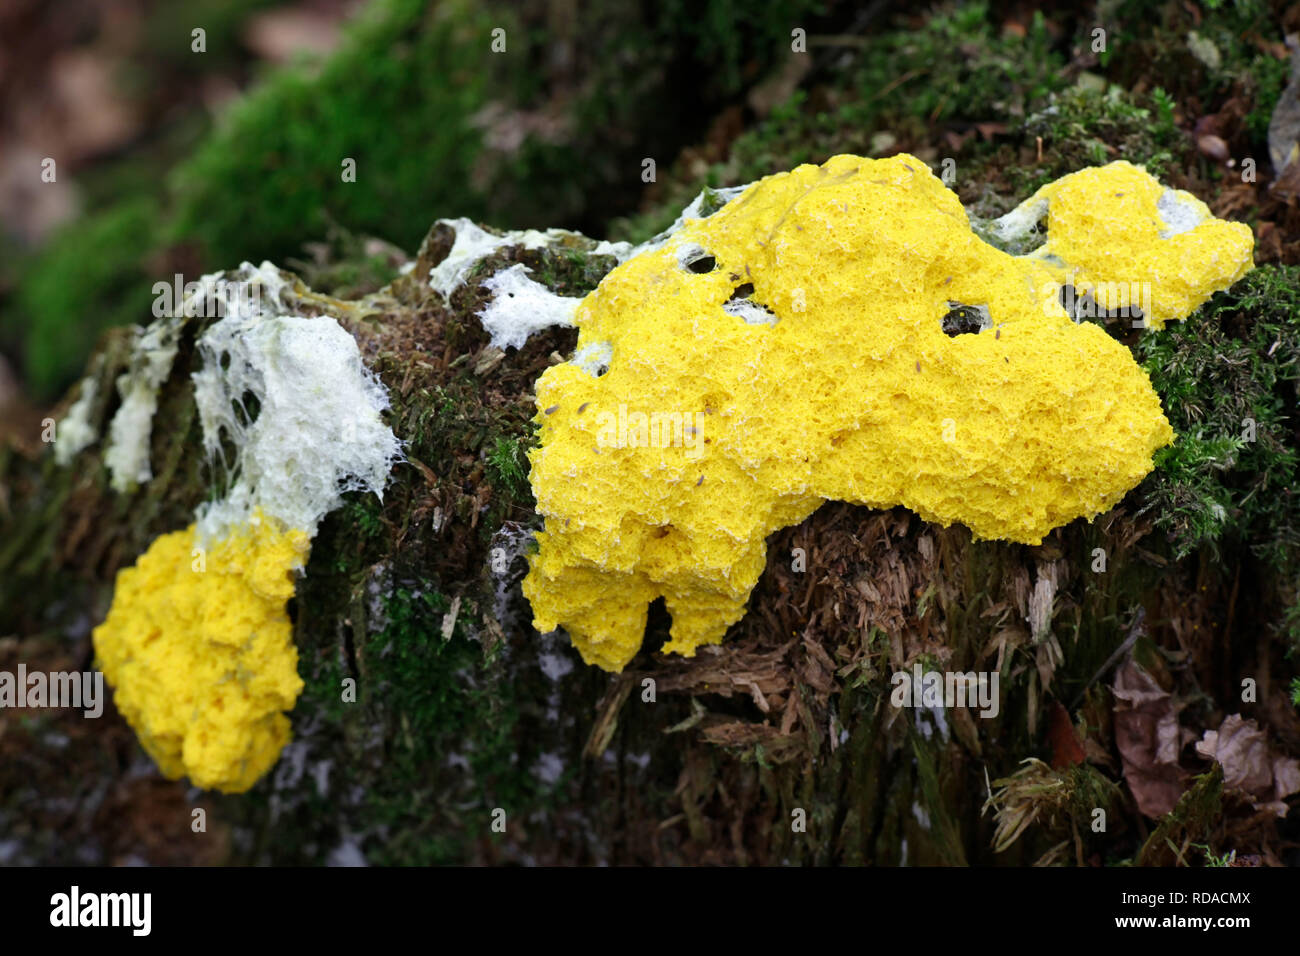 Fuligo septica, commonly called dog vomit slime mold, scrambled egg slime mold, or flowers of tan Stock Photo